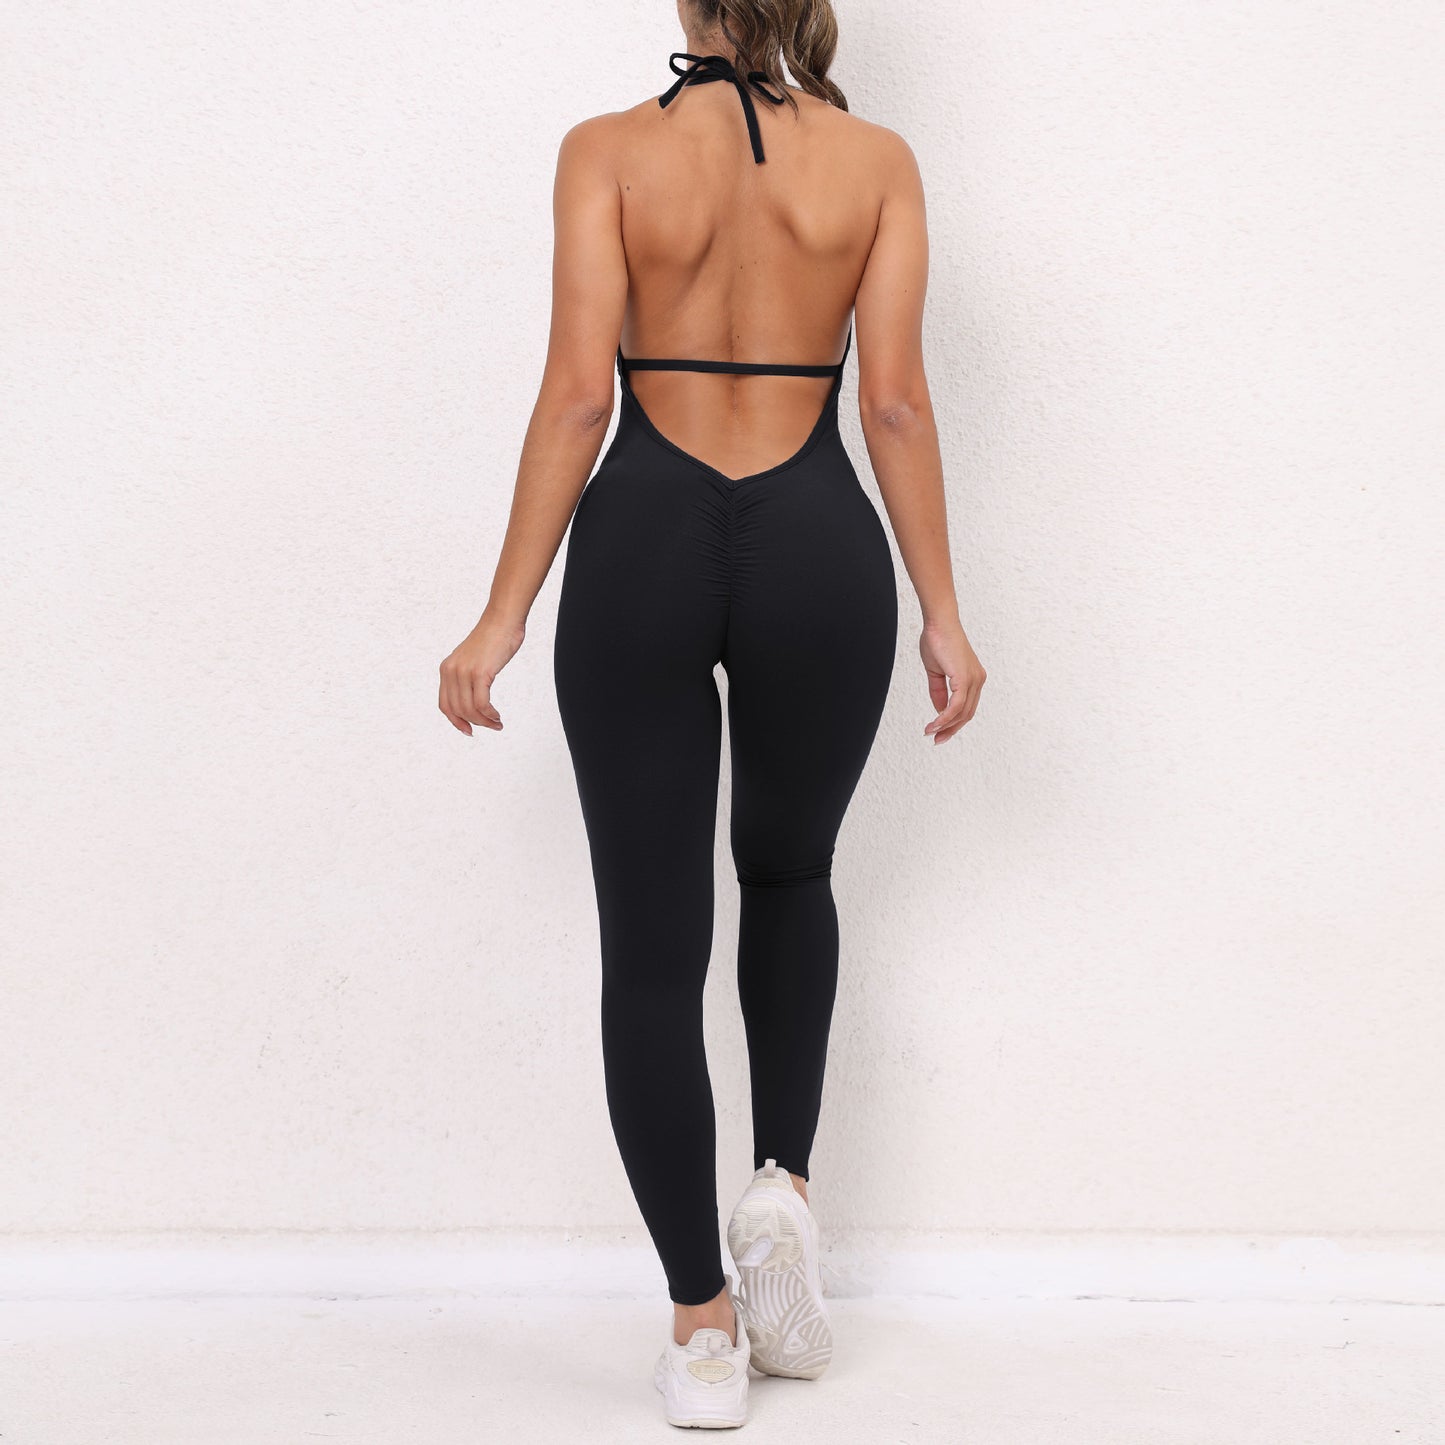 Lace up One Piece Quick Drying Skinny Yoga Pants Breathable Women Type Wrinkle Peach Hip Raise Exercise Workout Pants